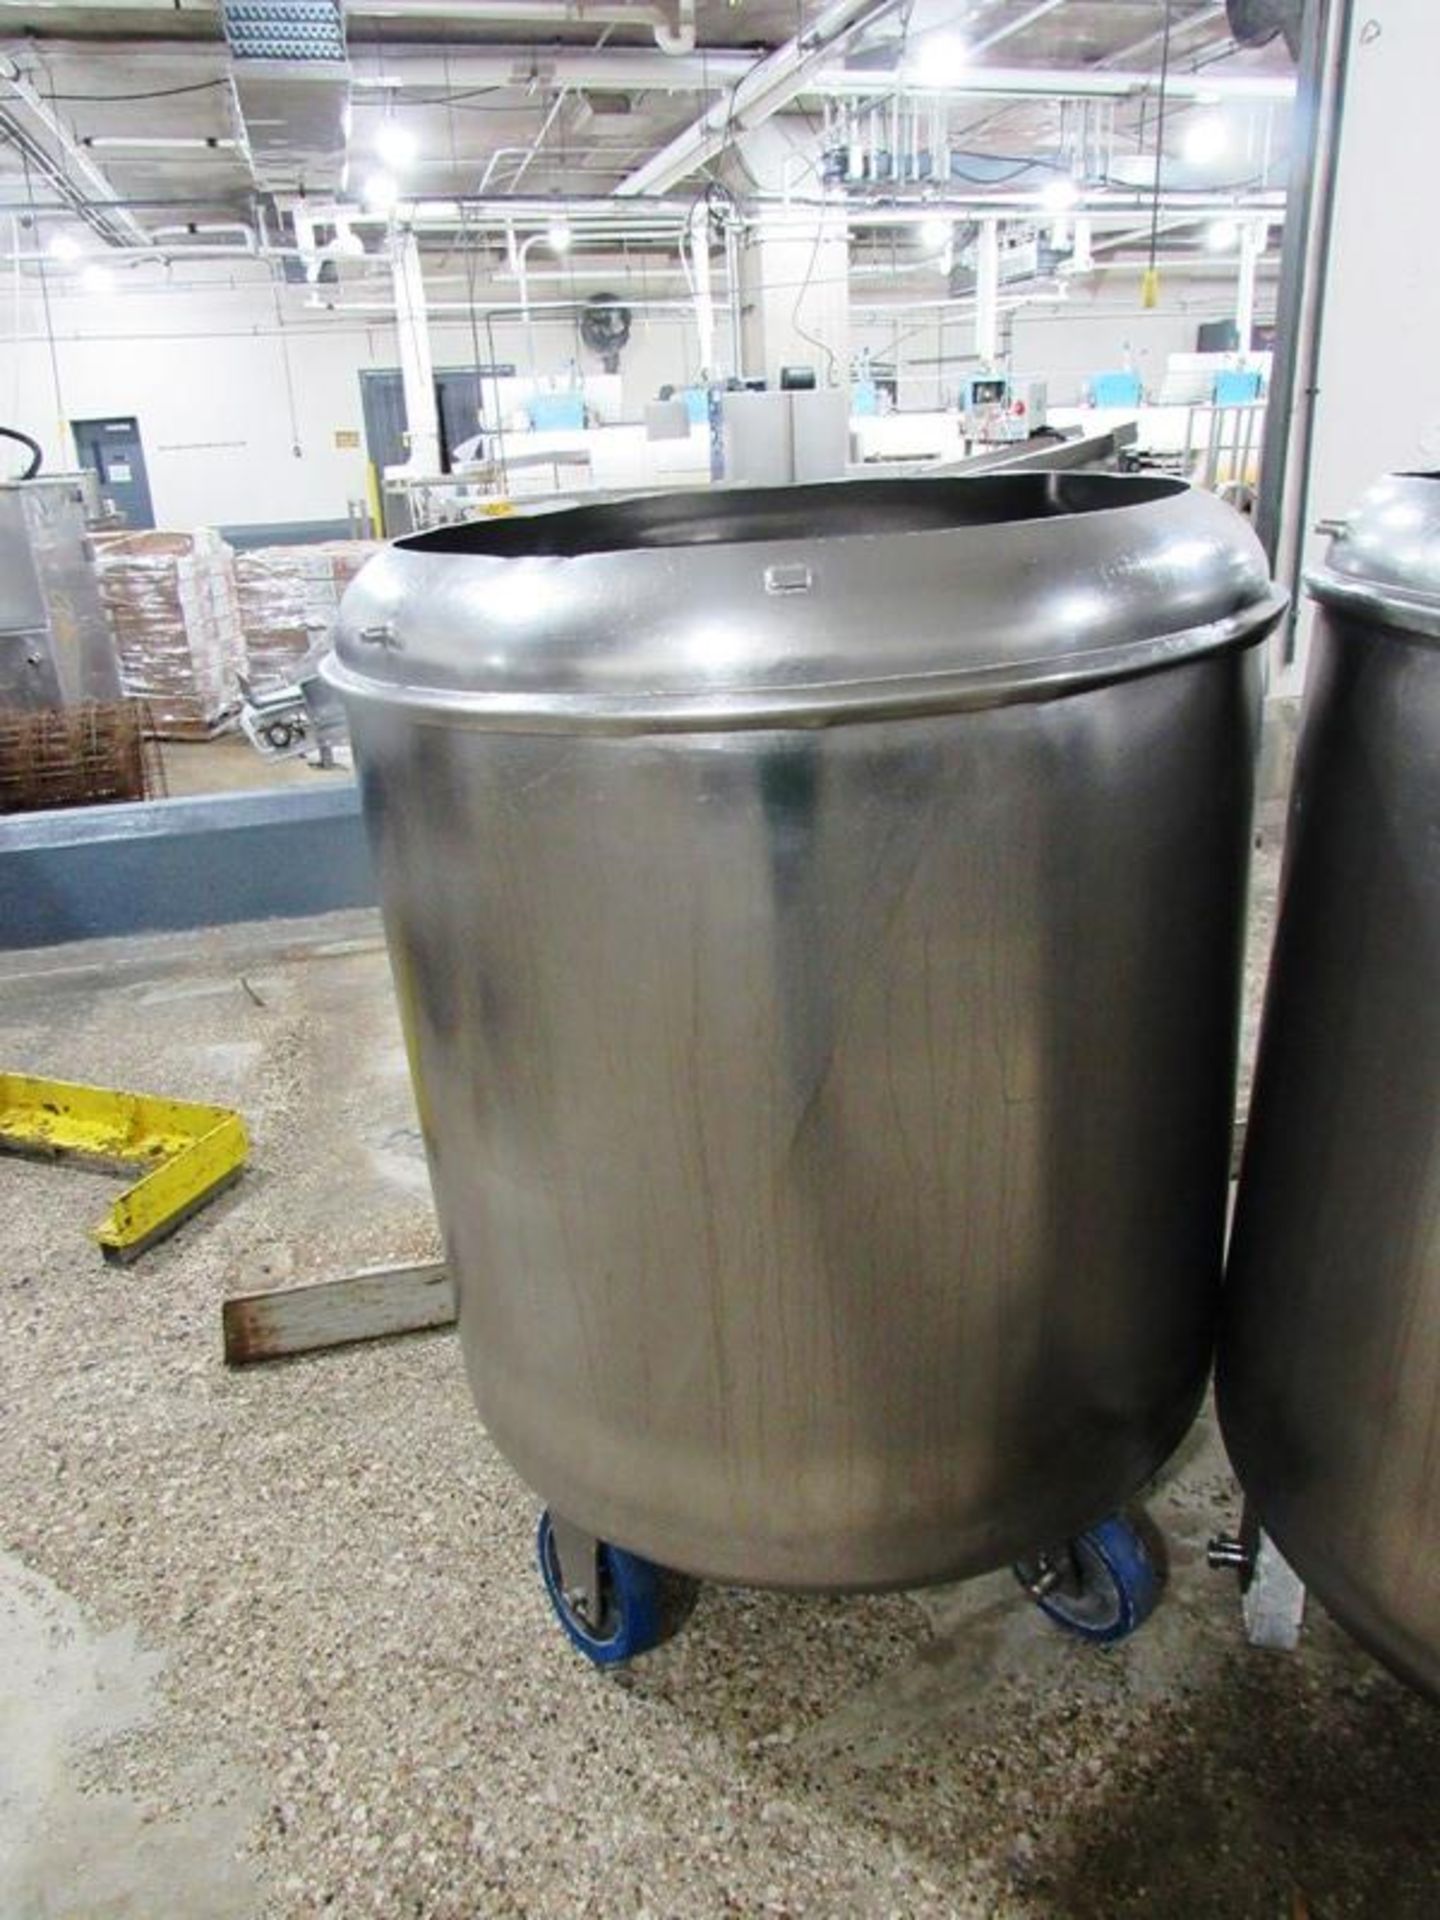 Globus Mdl. HS 3/5 Tumbling System, tumbling bed, (1) 750 liter stainless steel drum with lid, - Image 5 of 6